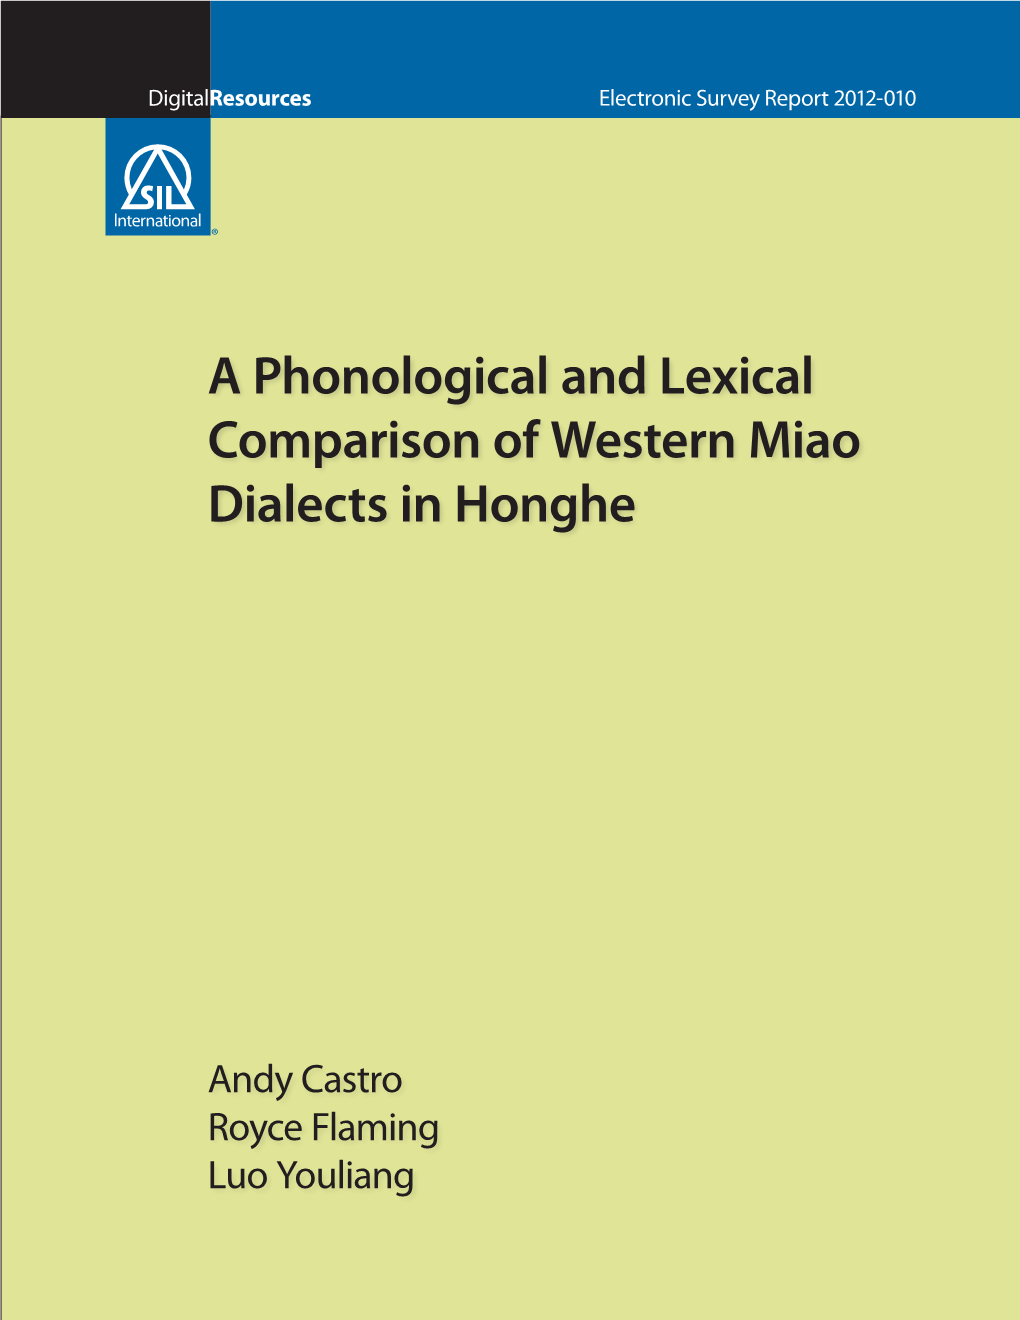 A Phonological and Lexical Comparison of Western Miao Dialects in Honghe